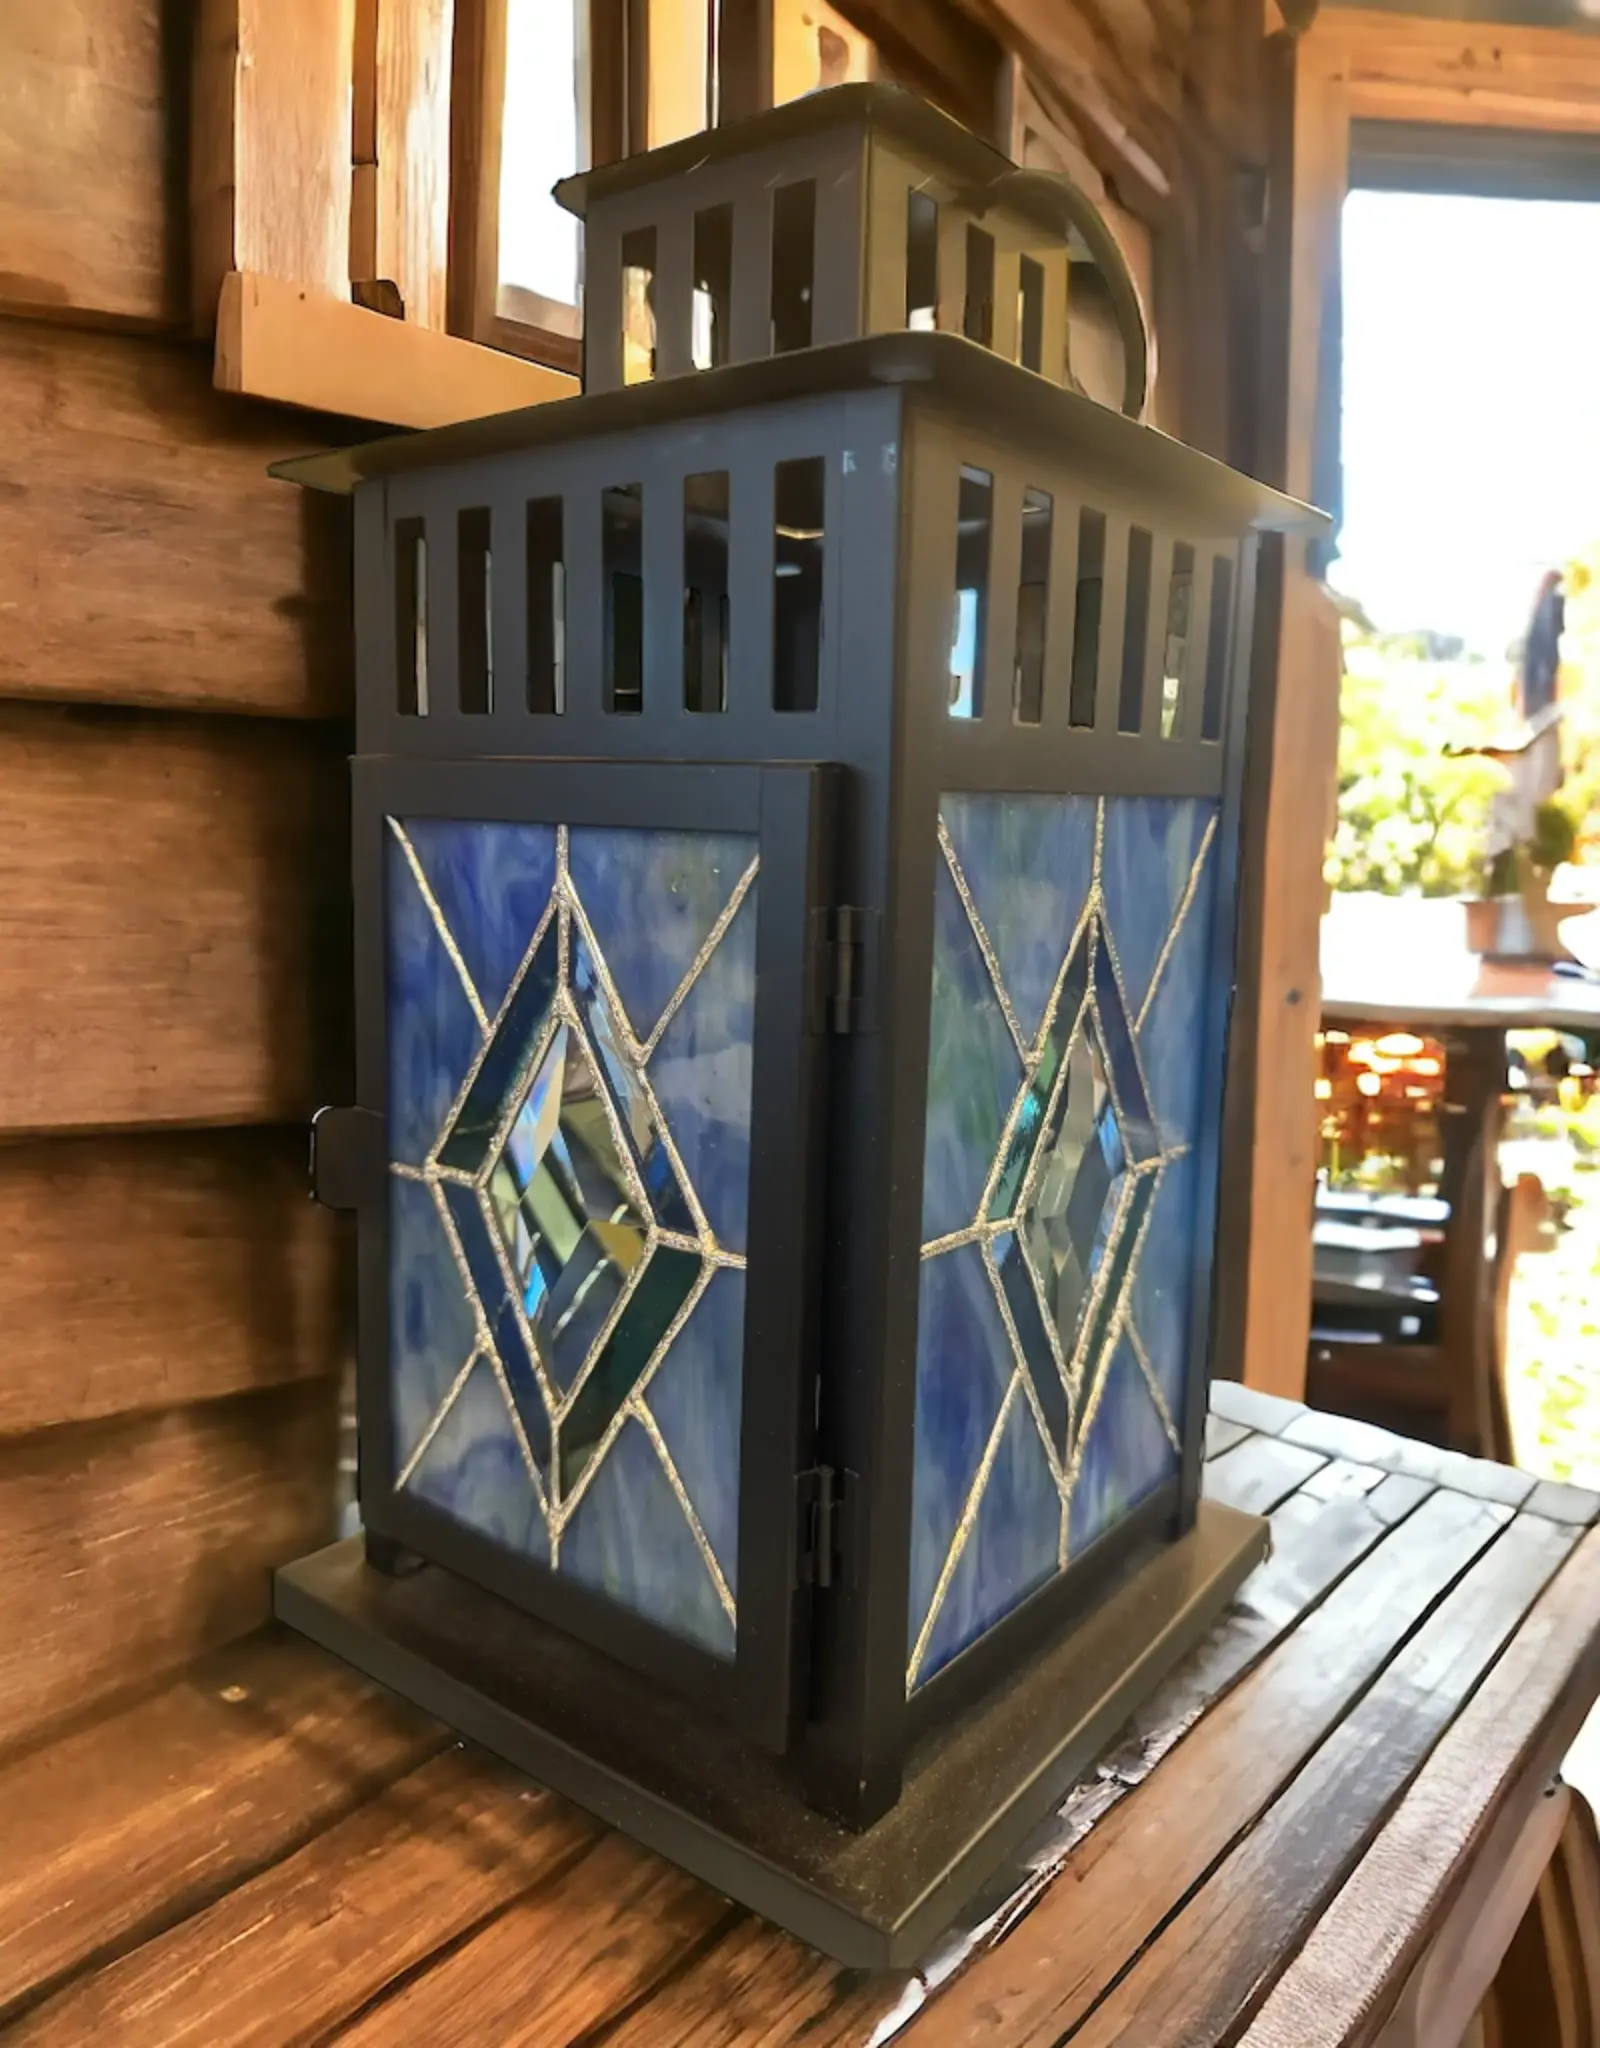 Artist- Andrew Reid ARLNTRNBLD Blue Diamond with clear bevel Stained glass Lantern by Andrew Reid